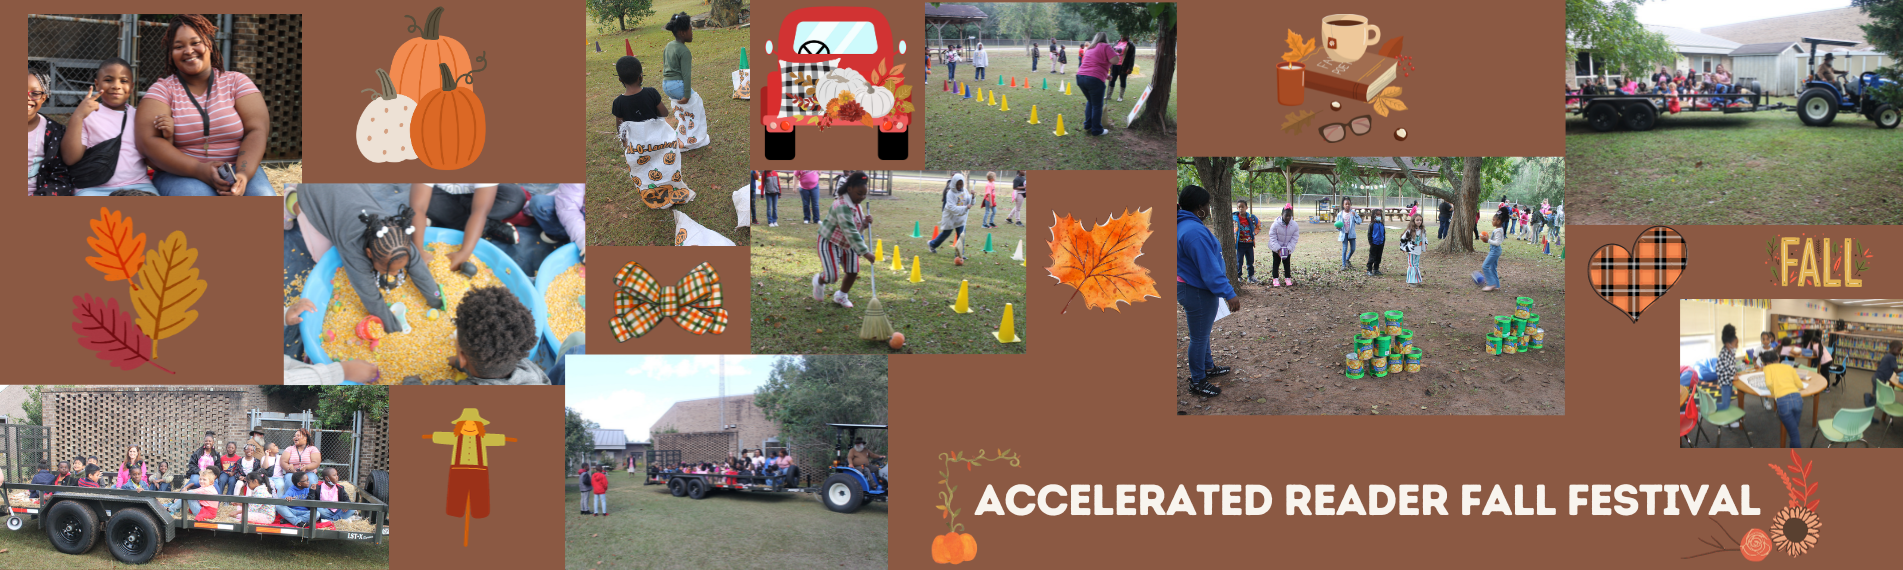 Accelerated Reader Fall Festival